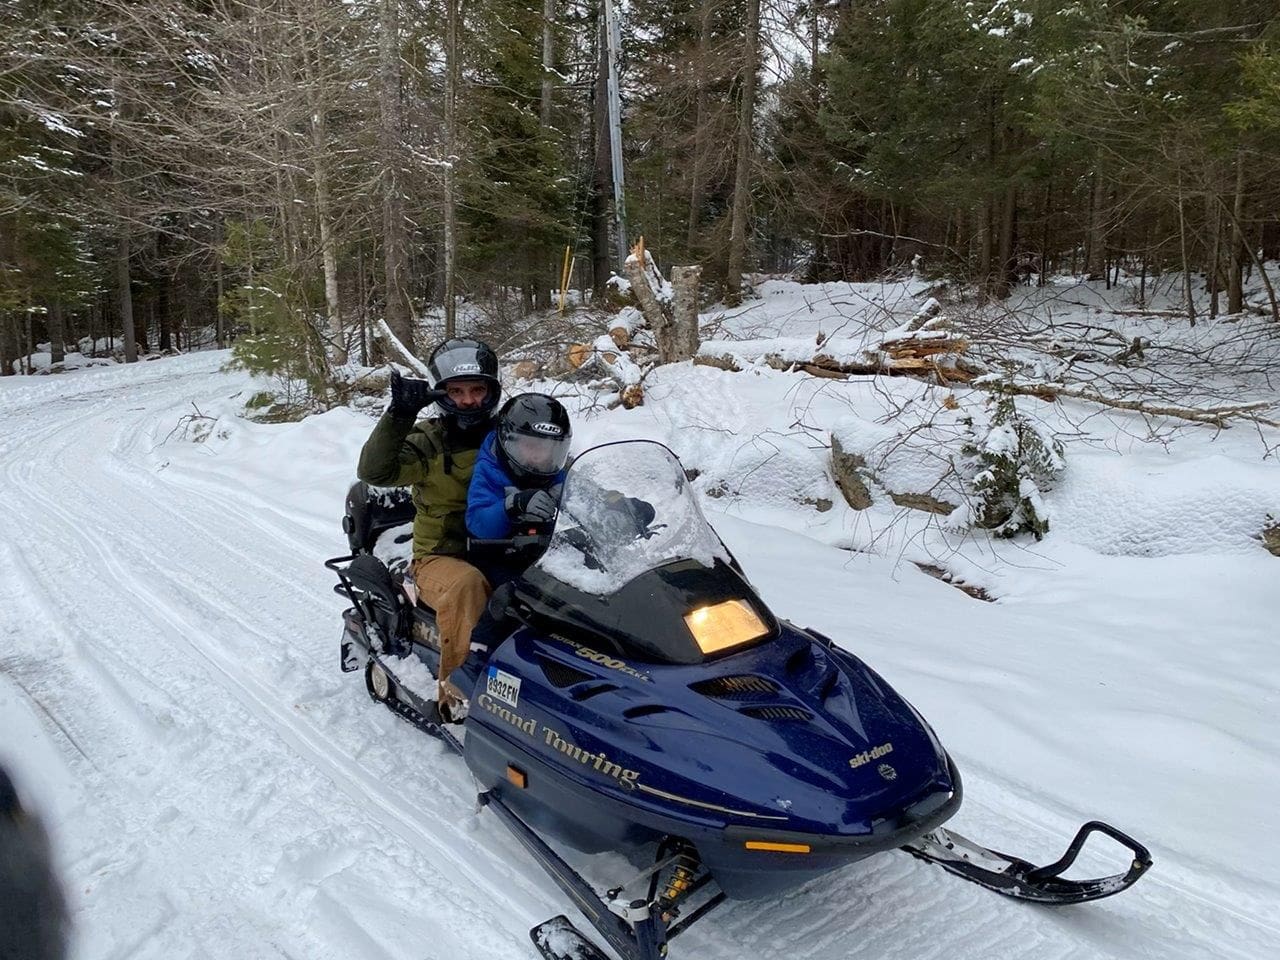 A man riding on the back of a blue snowmobile.